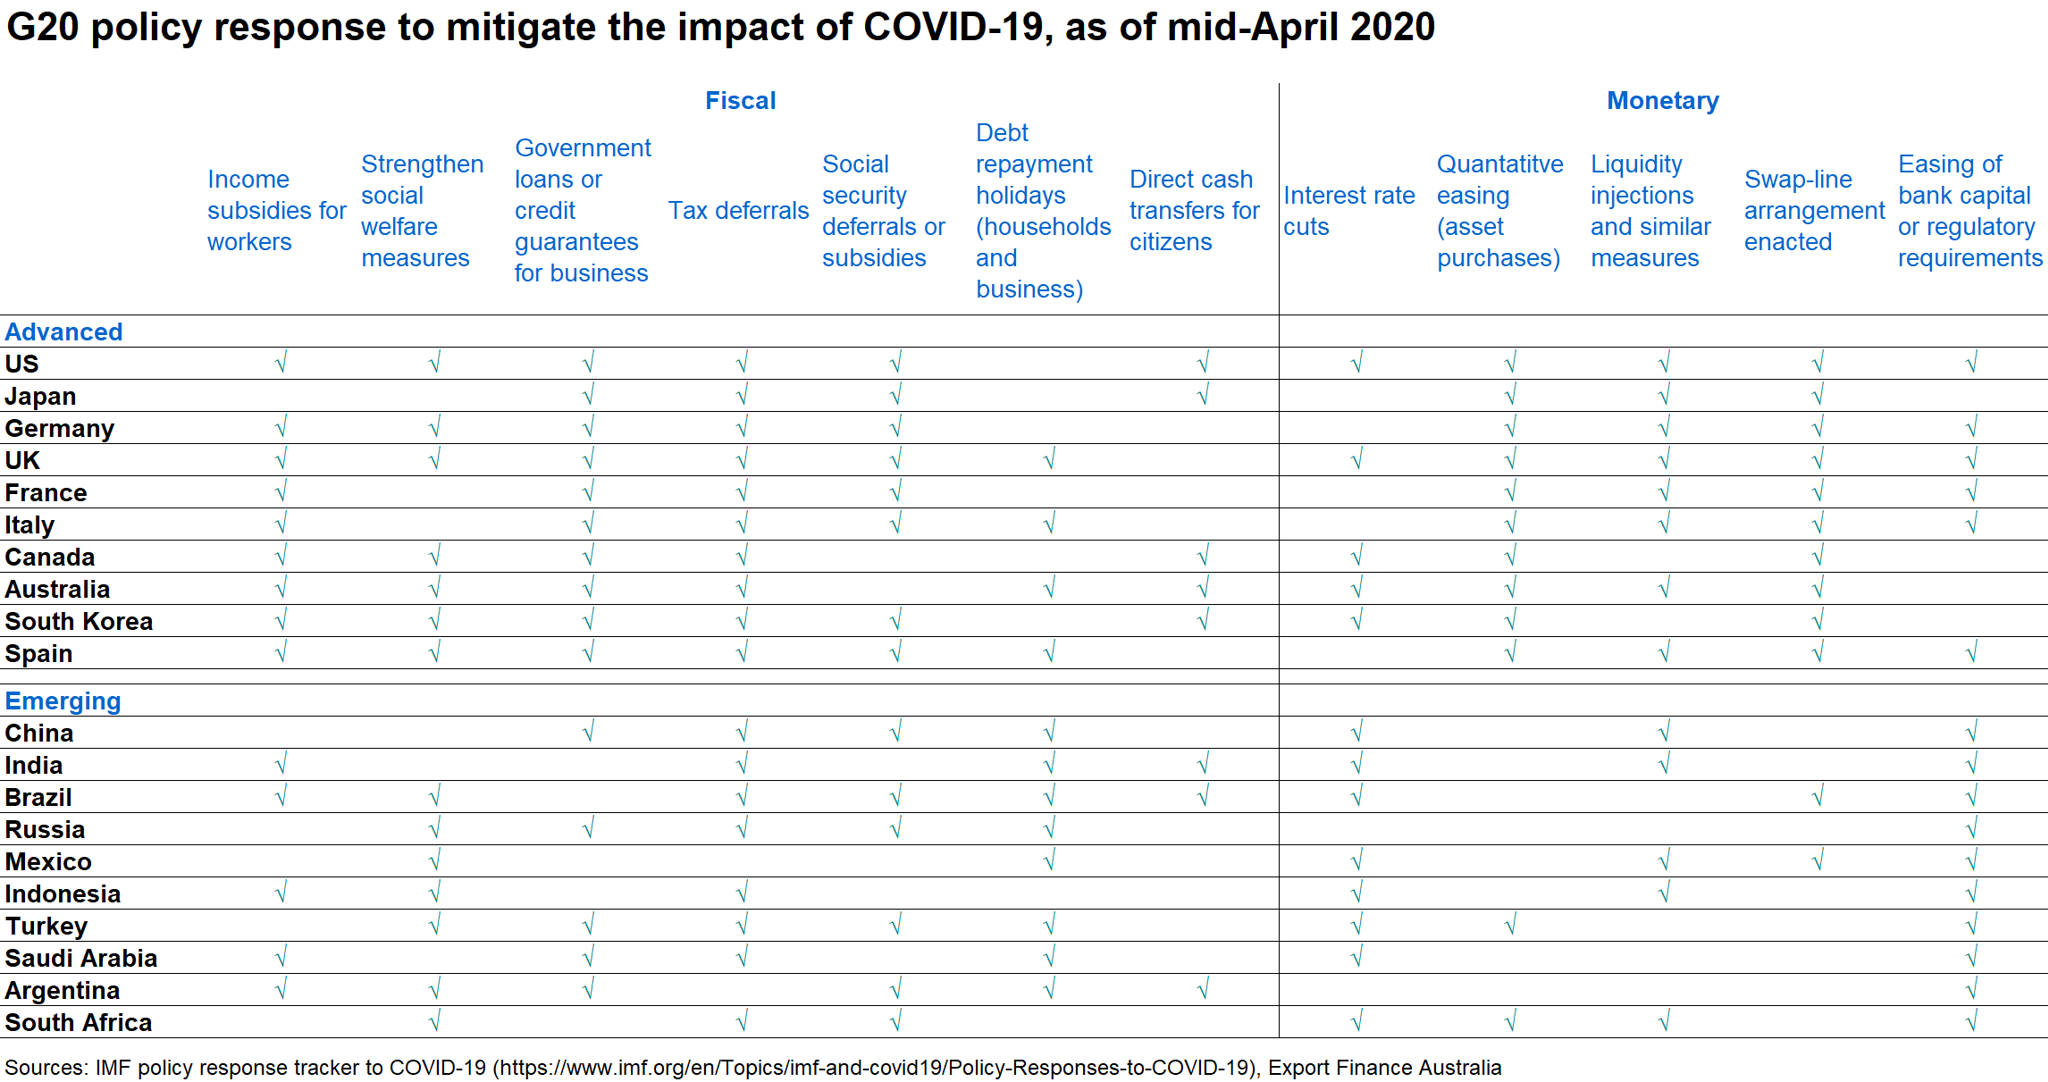 Fig 4 G20 Policy Response To Mitigate The Impact Of COVID 19, As Of Mid April 2020